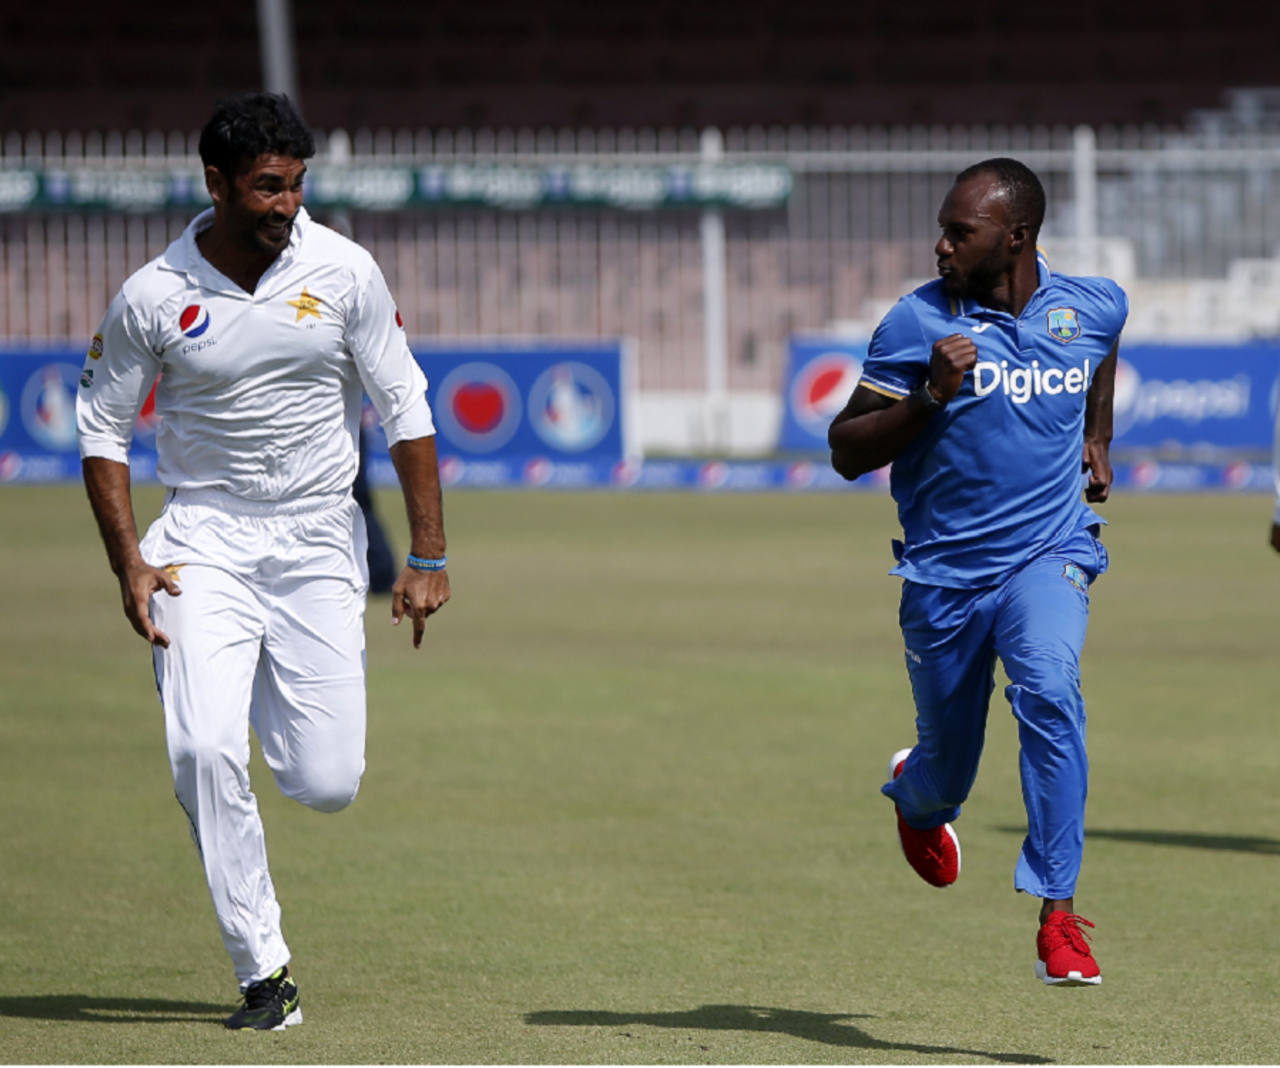 Sohail Khan and Jermaine Blackwood race each other in jest after a hard-fought series, Pakistan v West Indies, 3rd Test, Sharjah, 5th day, November 3, 2016